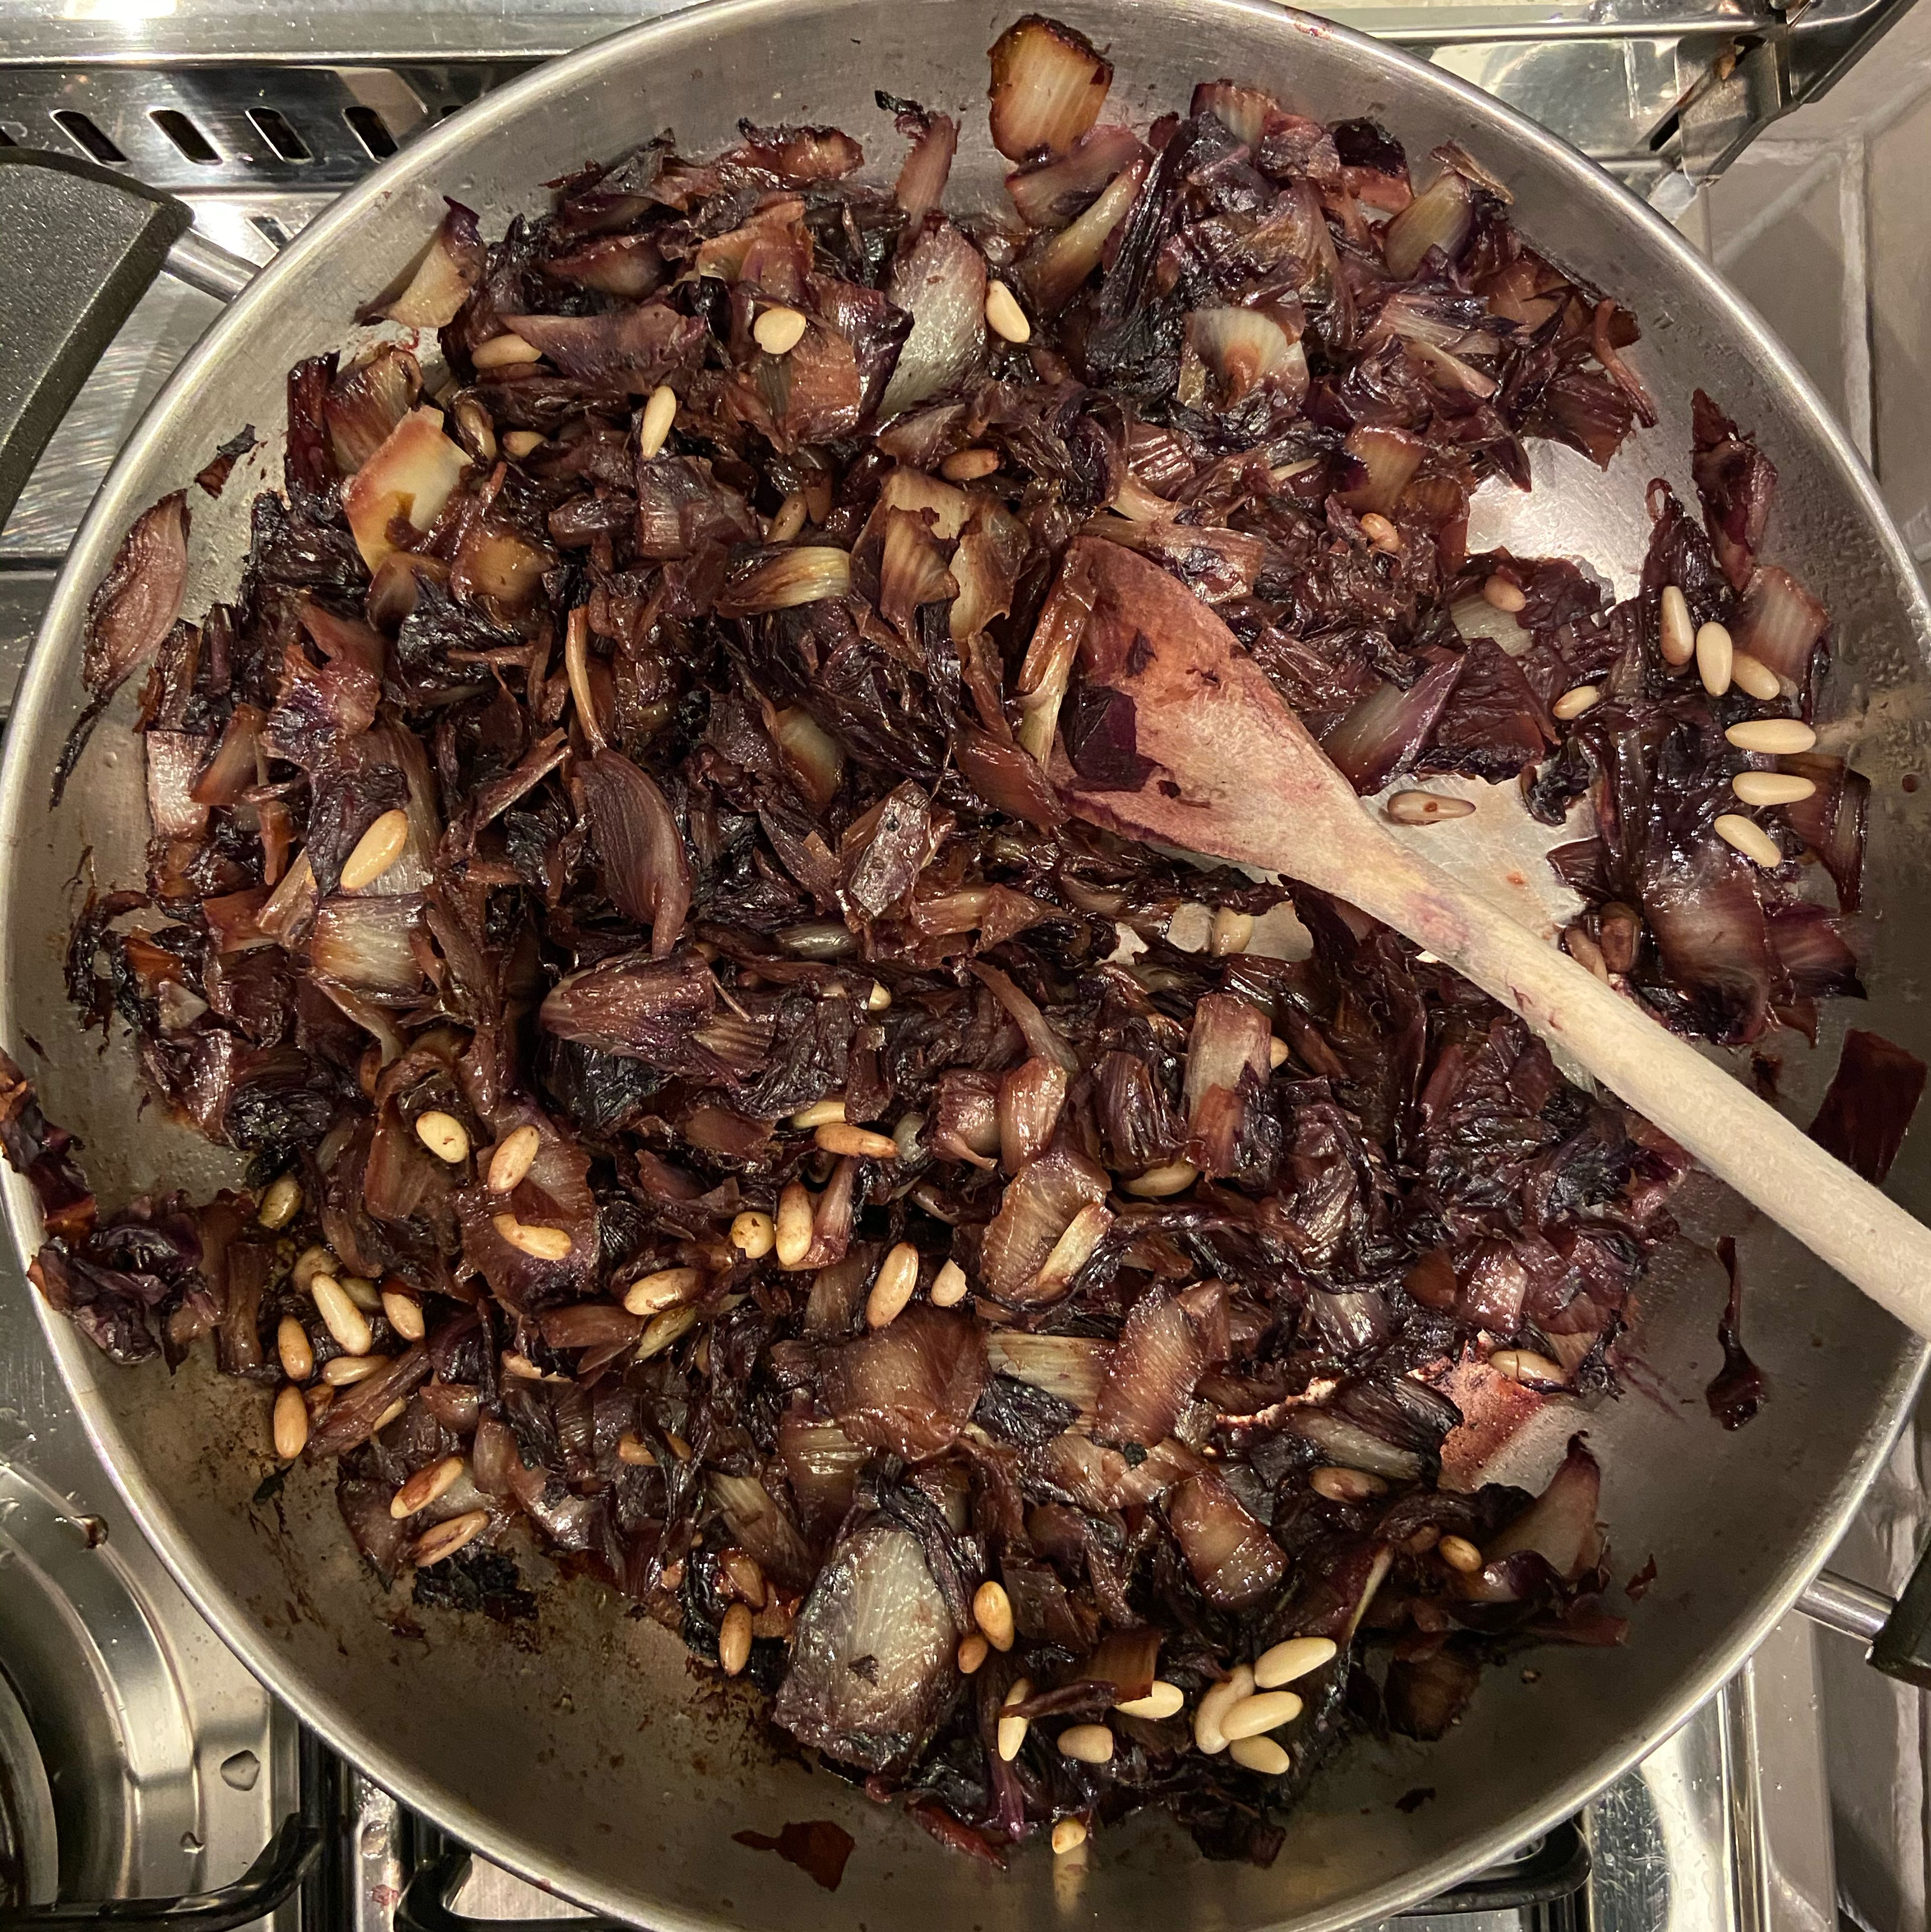 Add olive oil and a sliced onion to a frying pan; cook over medium heat until the onions are soft and golden. Then add the finely cut radicchio, pine nuts and salt. After a couple of minutes, add the red wine and let everything cook for around 8 minutes.